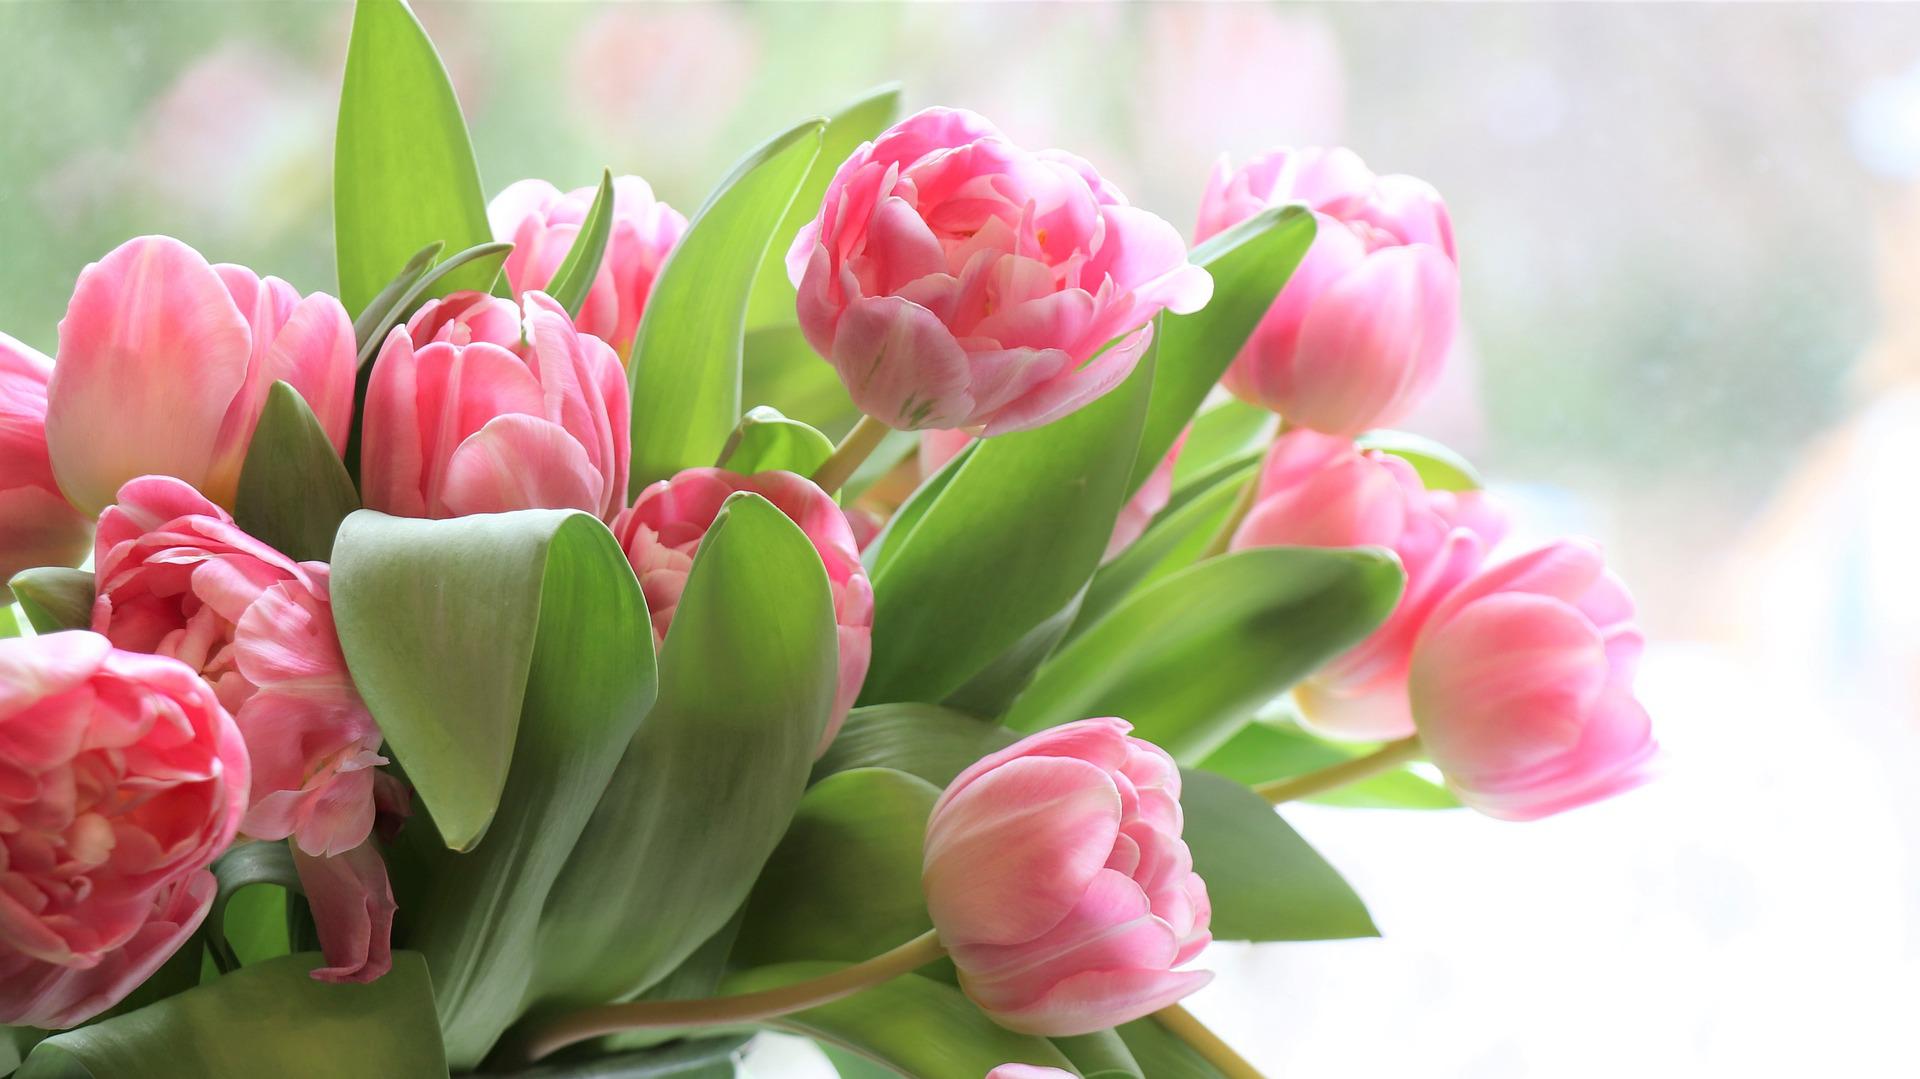 Tulips for Mother's Day